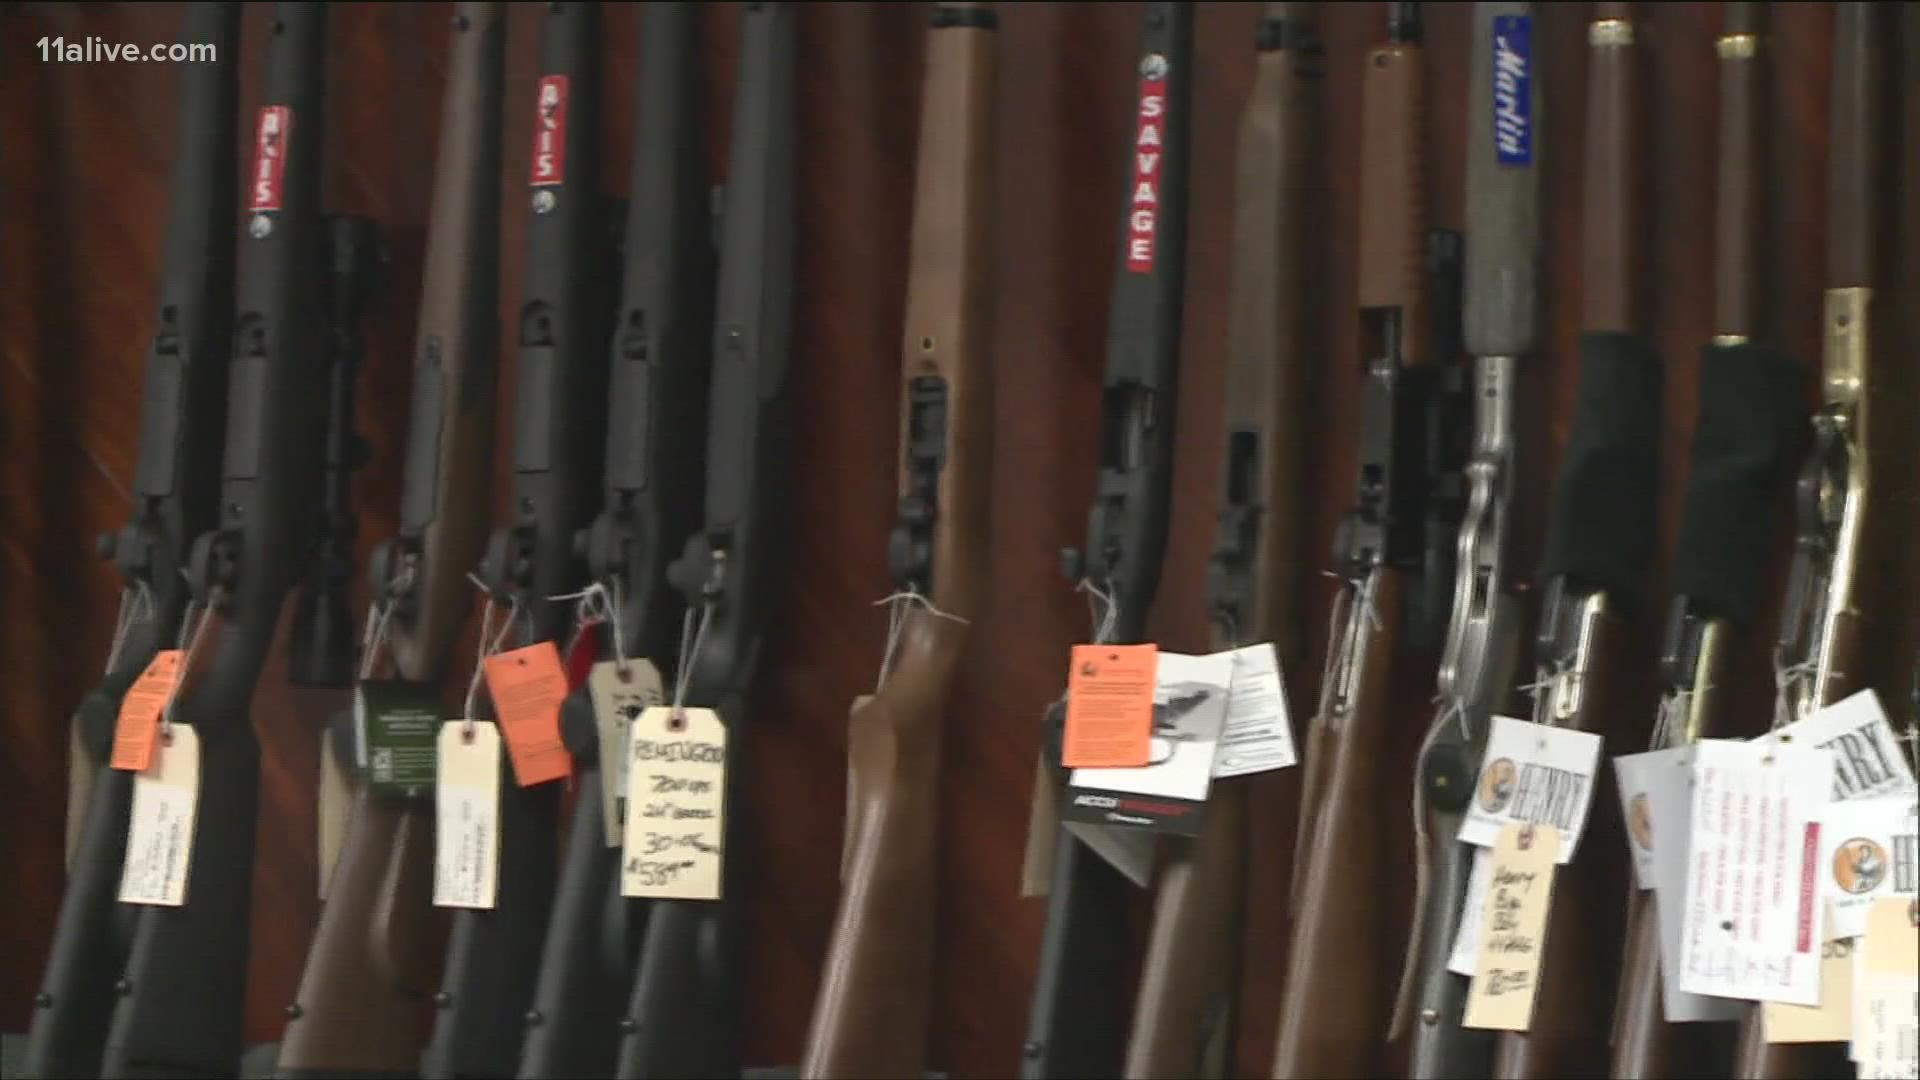 Remington Firearms will open manufacturing operations as well as a research and development center in LaGrange.